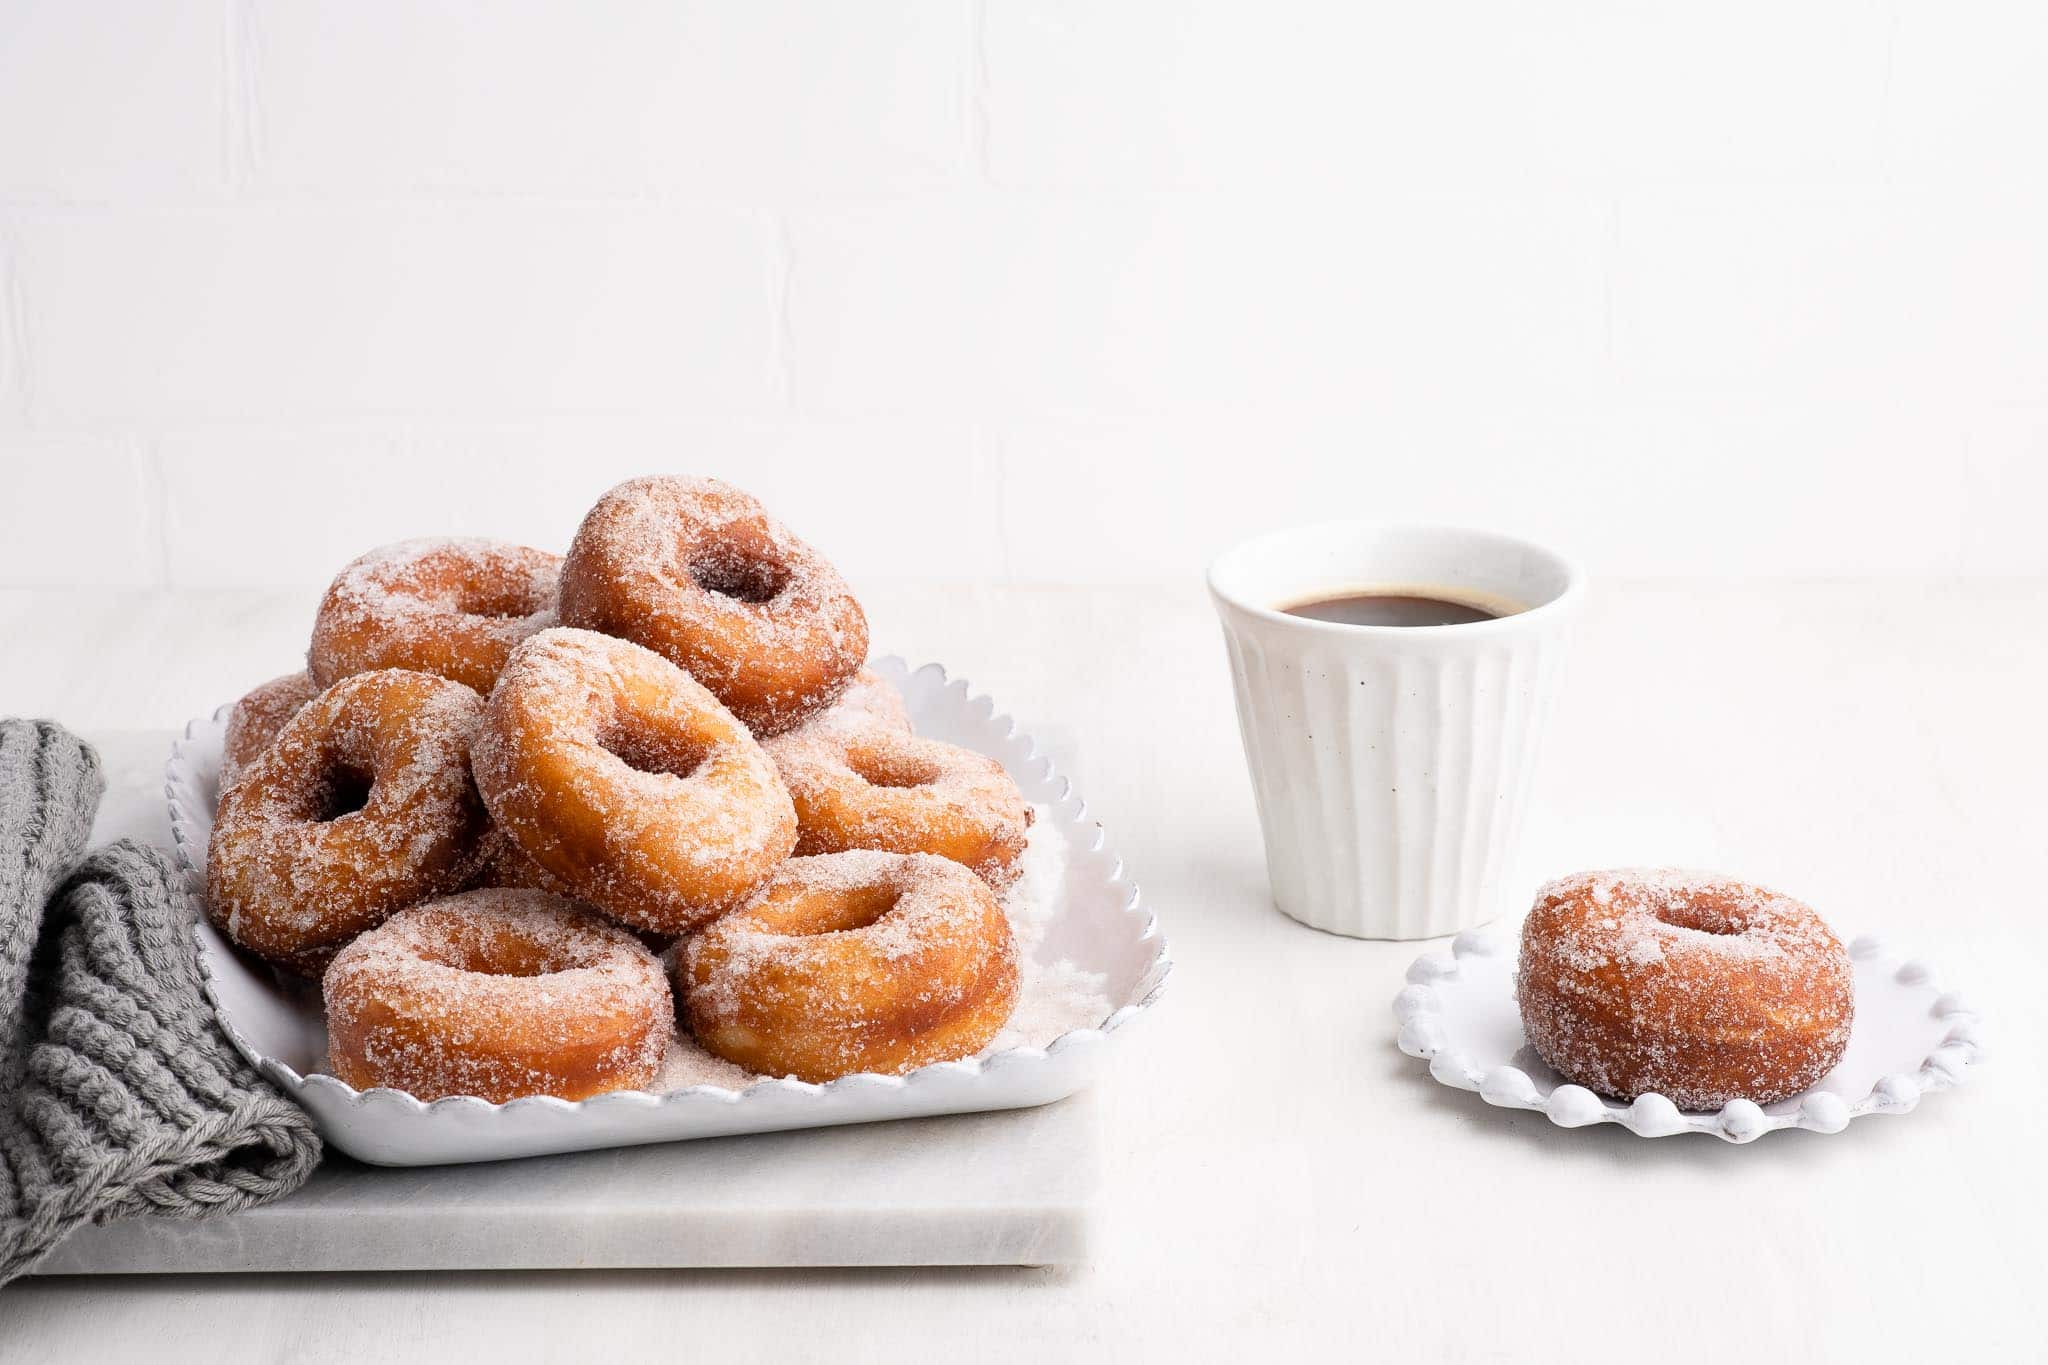 stack of cinnamon donuts on white plate